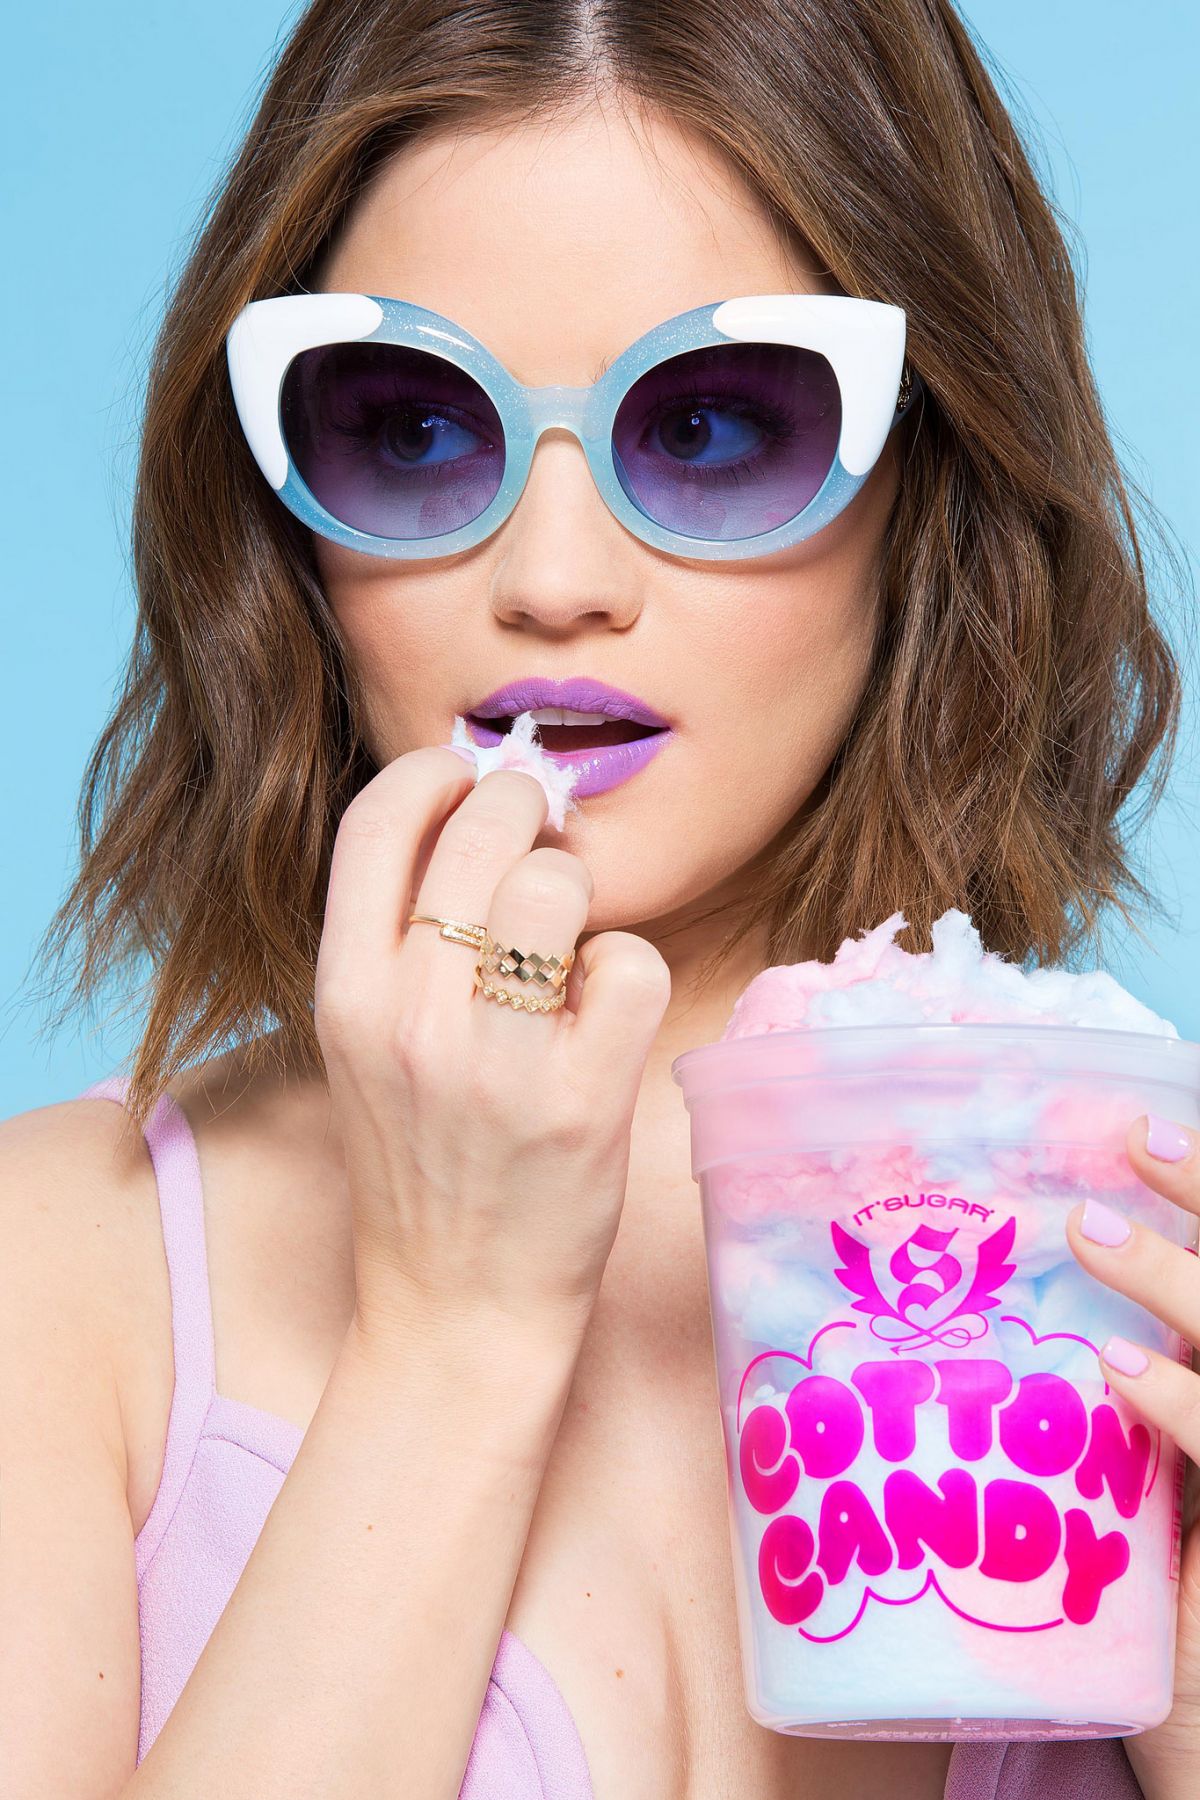 LUCY HALE in Cosmopolitan Magazine, May 2016 Issue – HawtCelebs